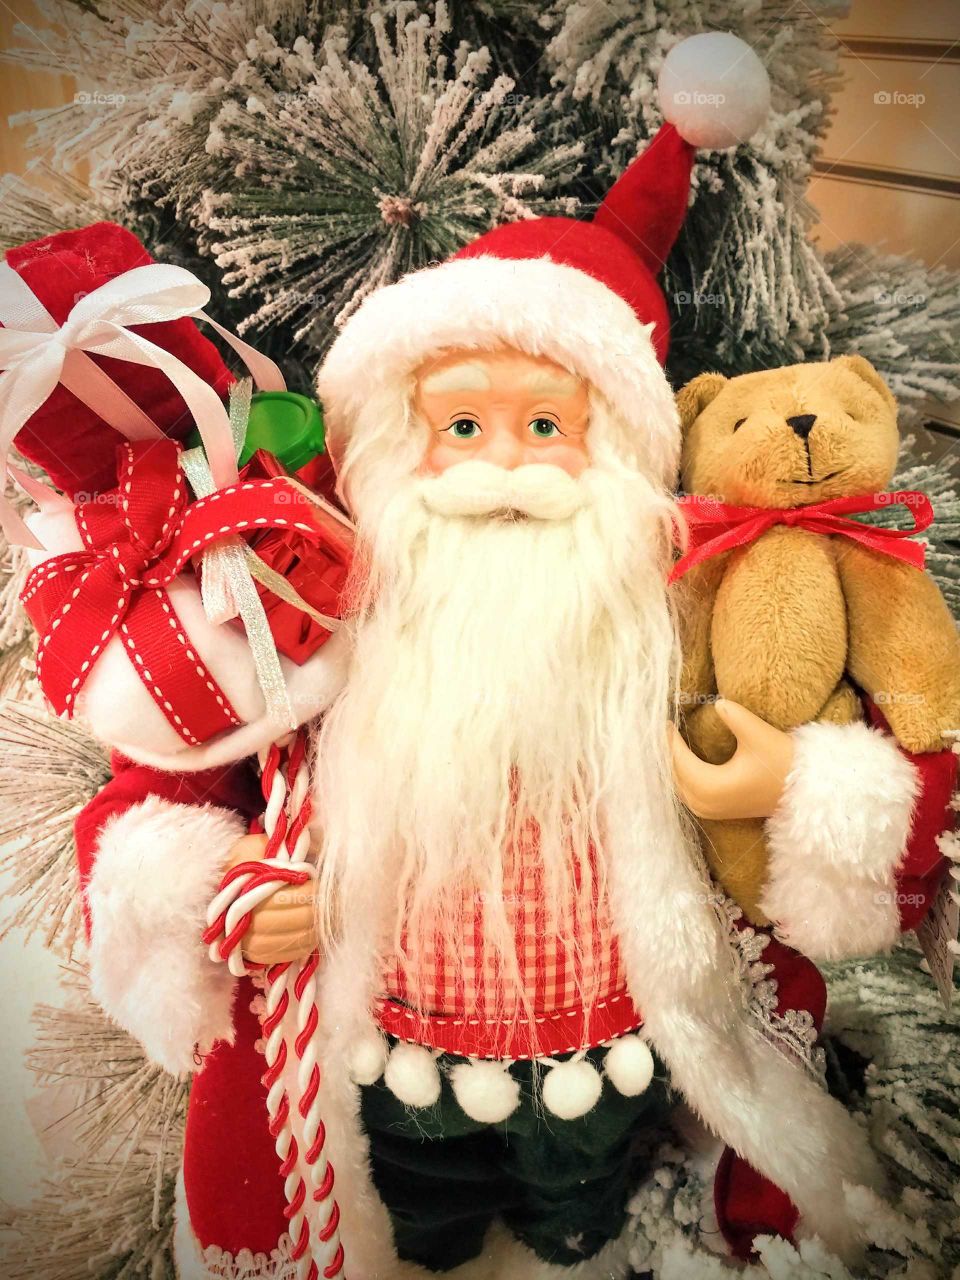 Santa Claus holding teddy bear and gifts